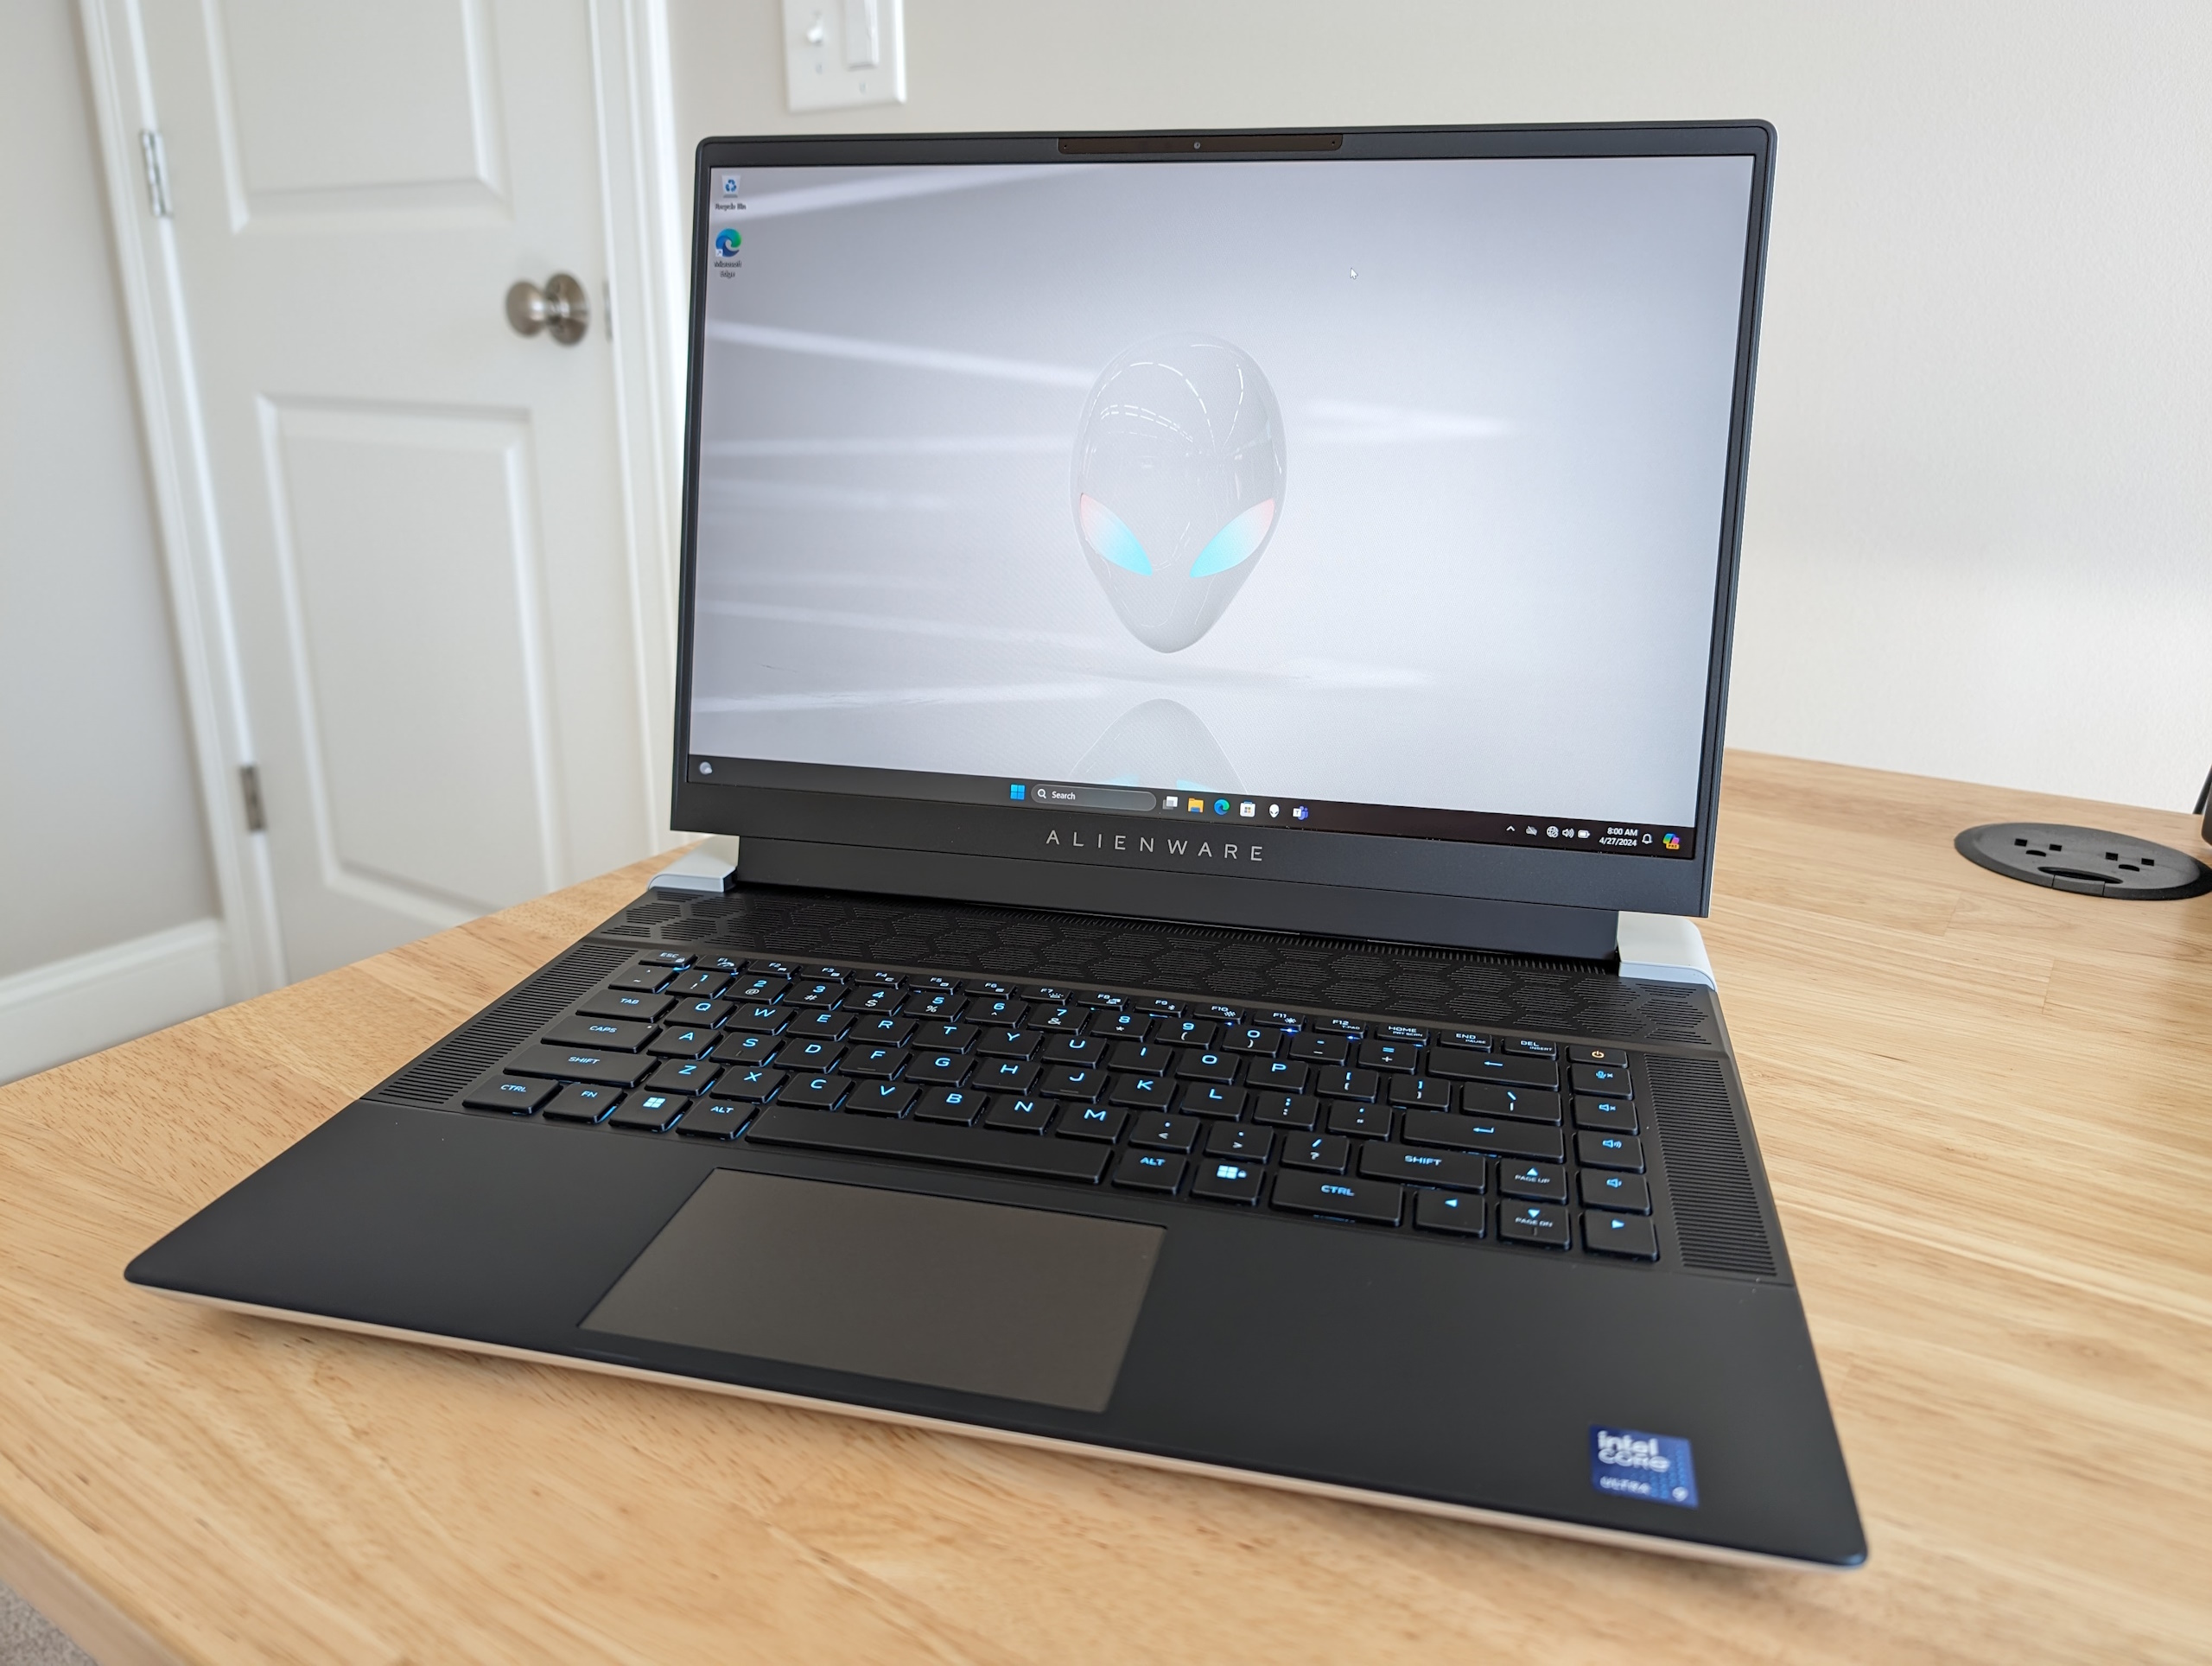 Alienware x16 R2 review: High-end gaming at a premium price